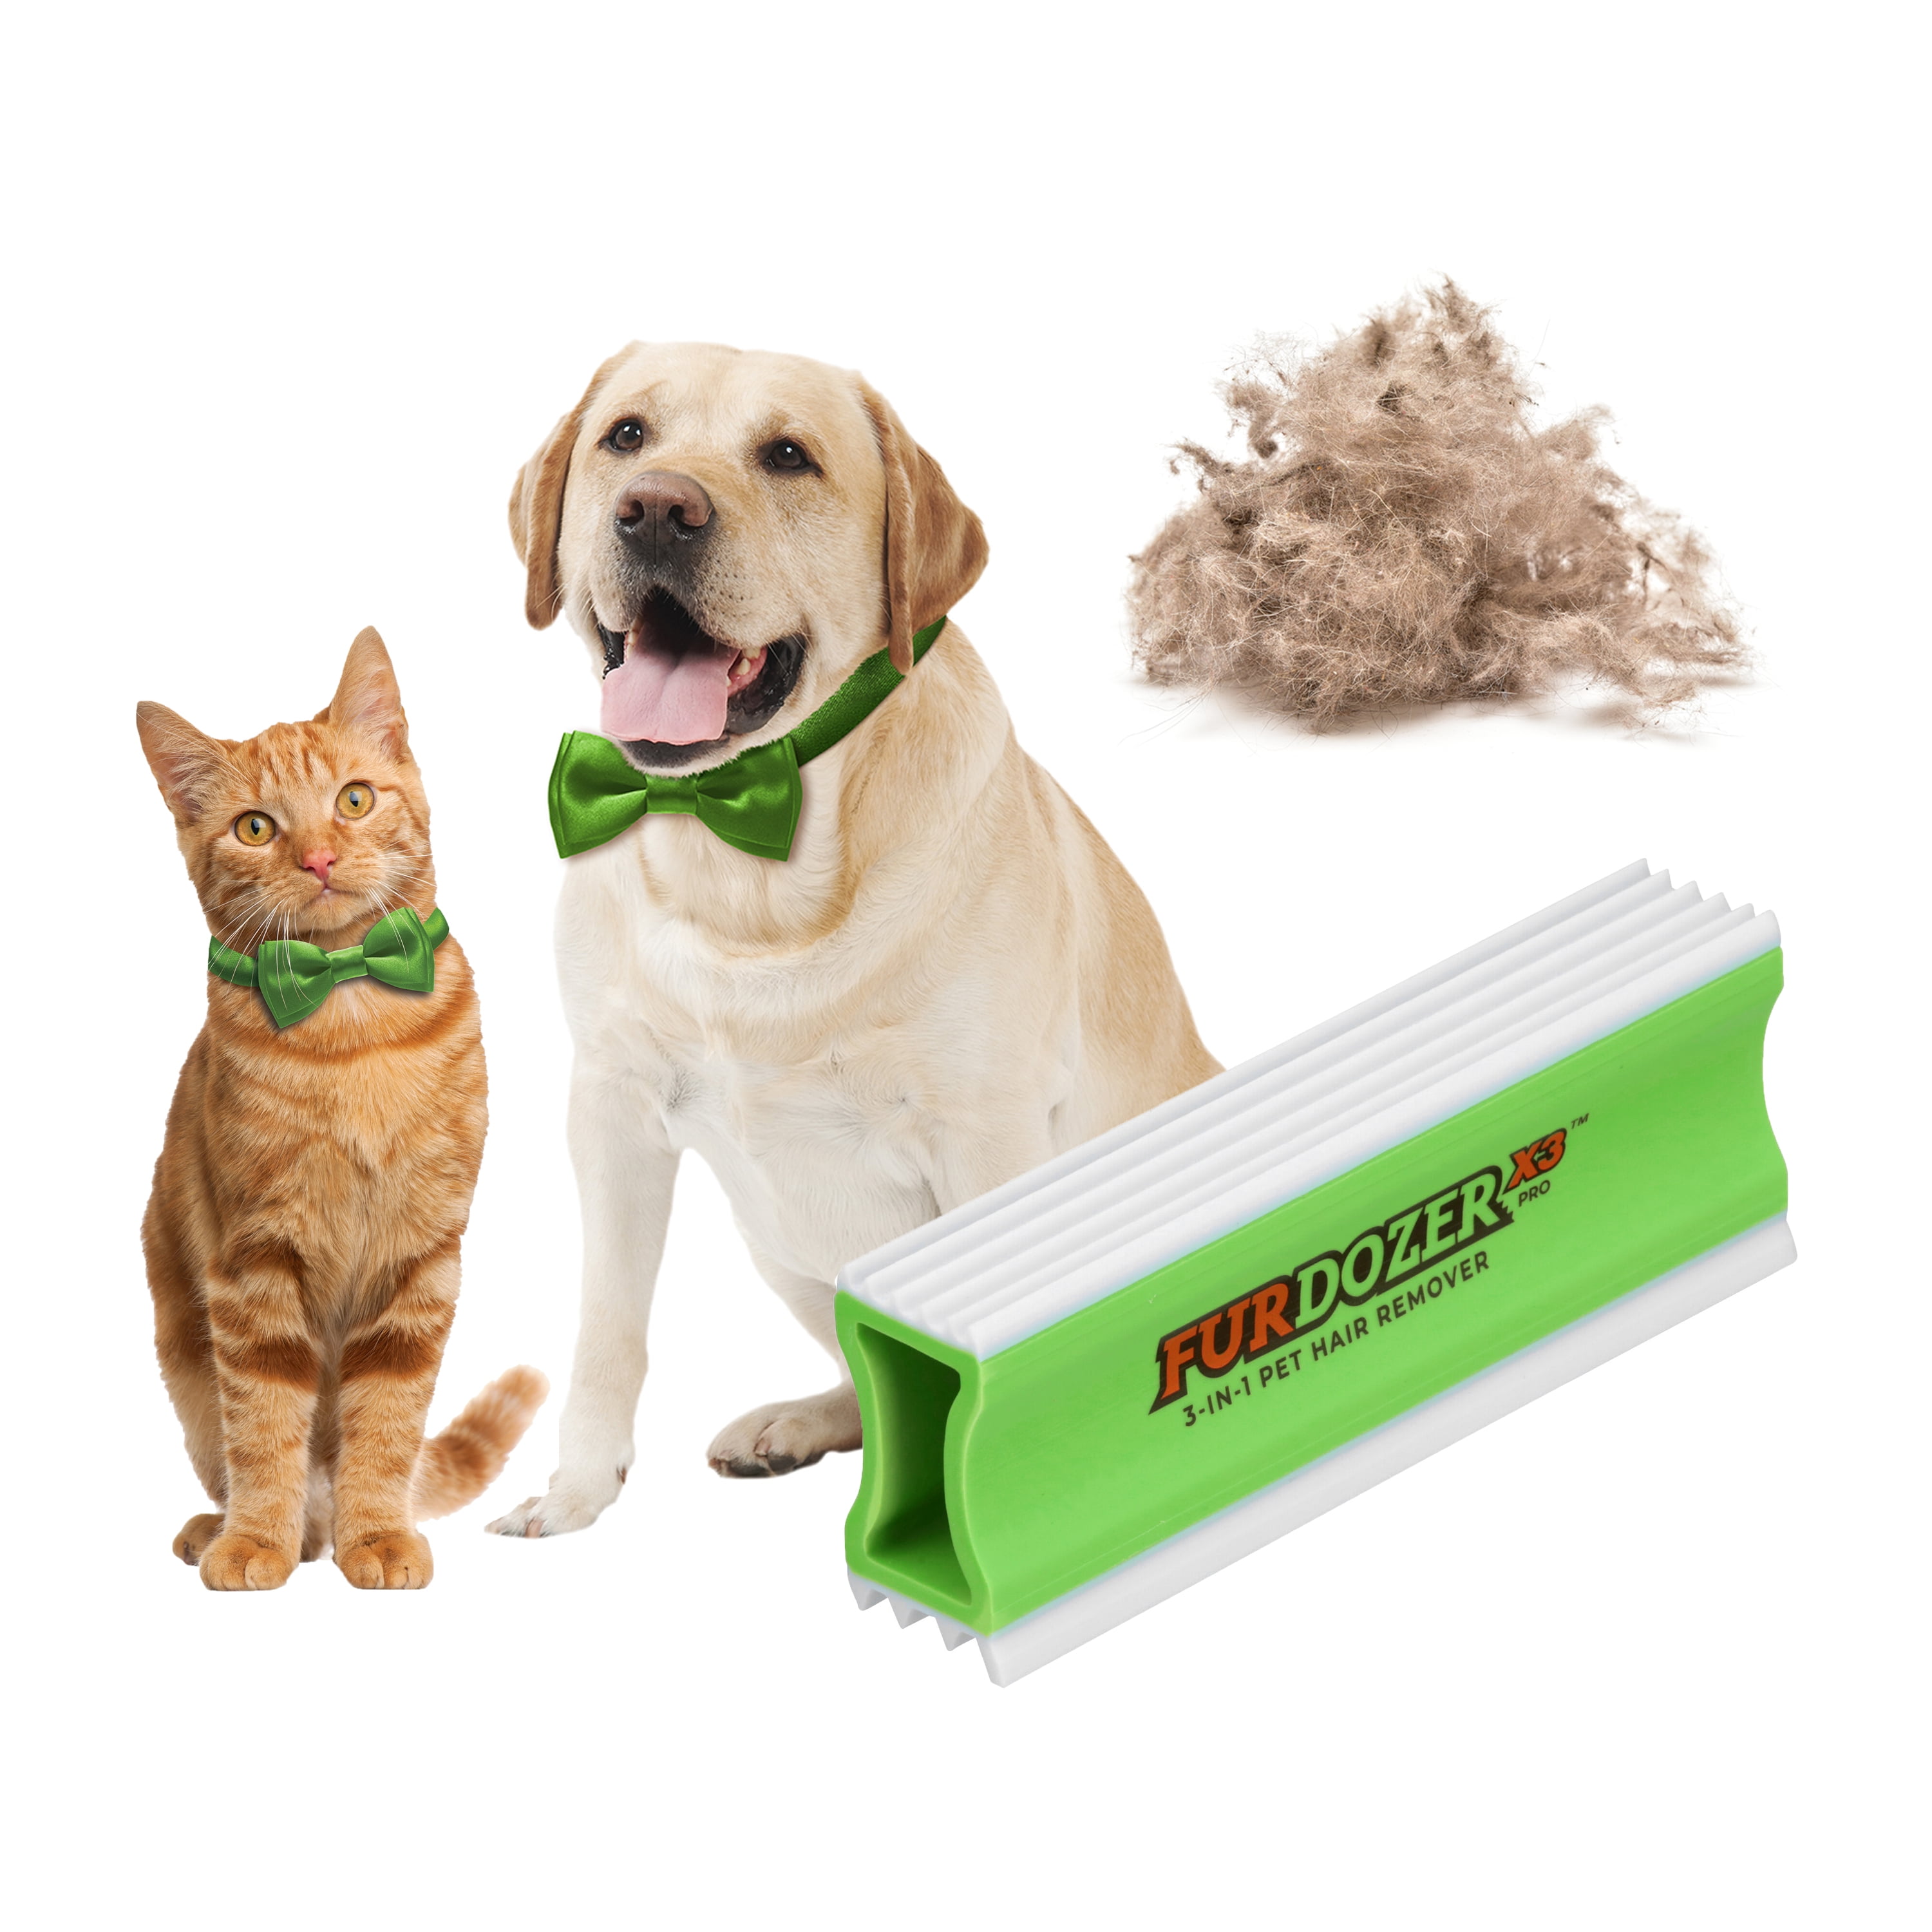 Buy DKStarry Pet Hair Remover for Laundry, Dog and Cat Hair